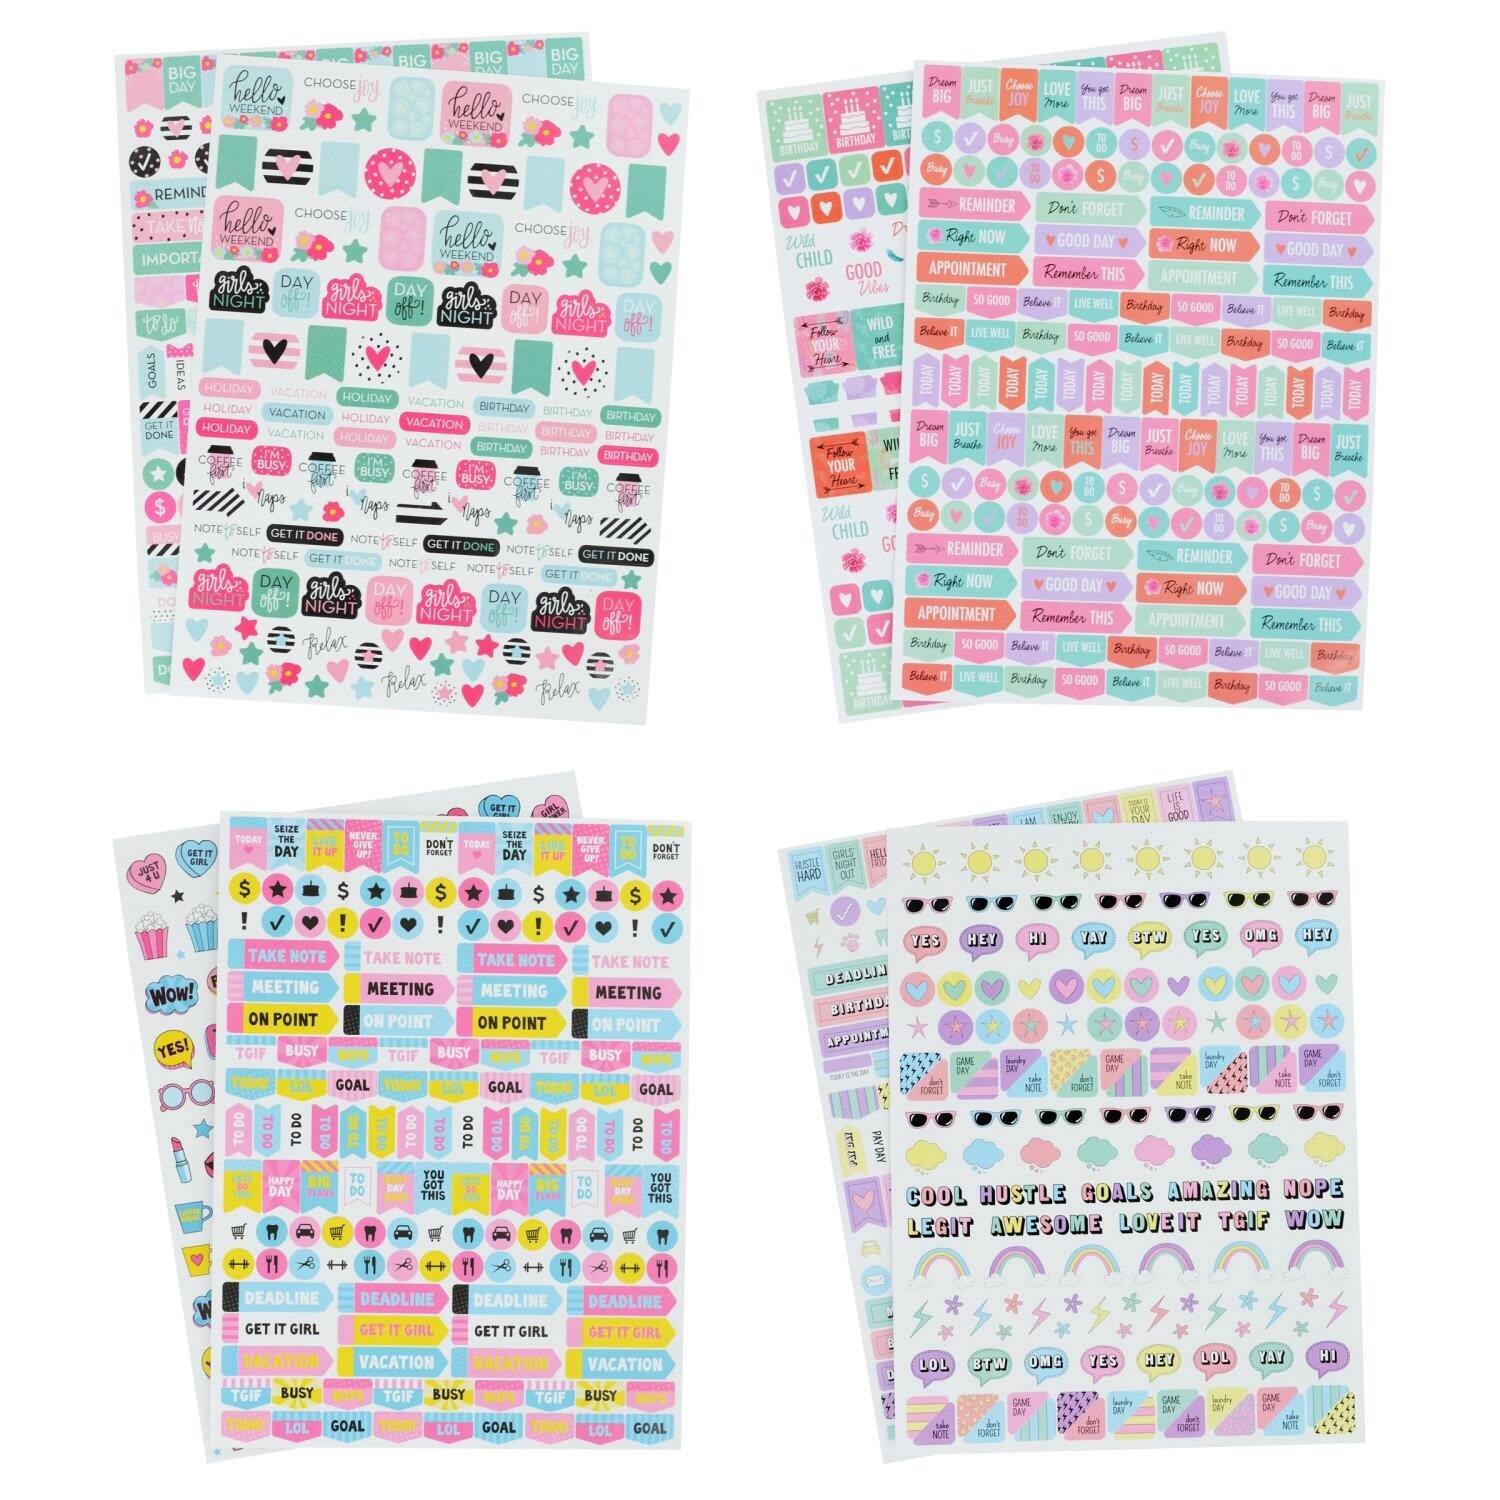 Jot Colorful Planner Stickers, 300-ct. Packs